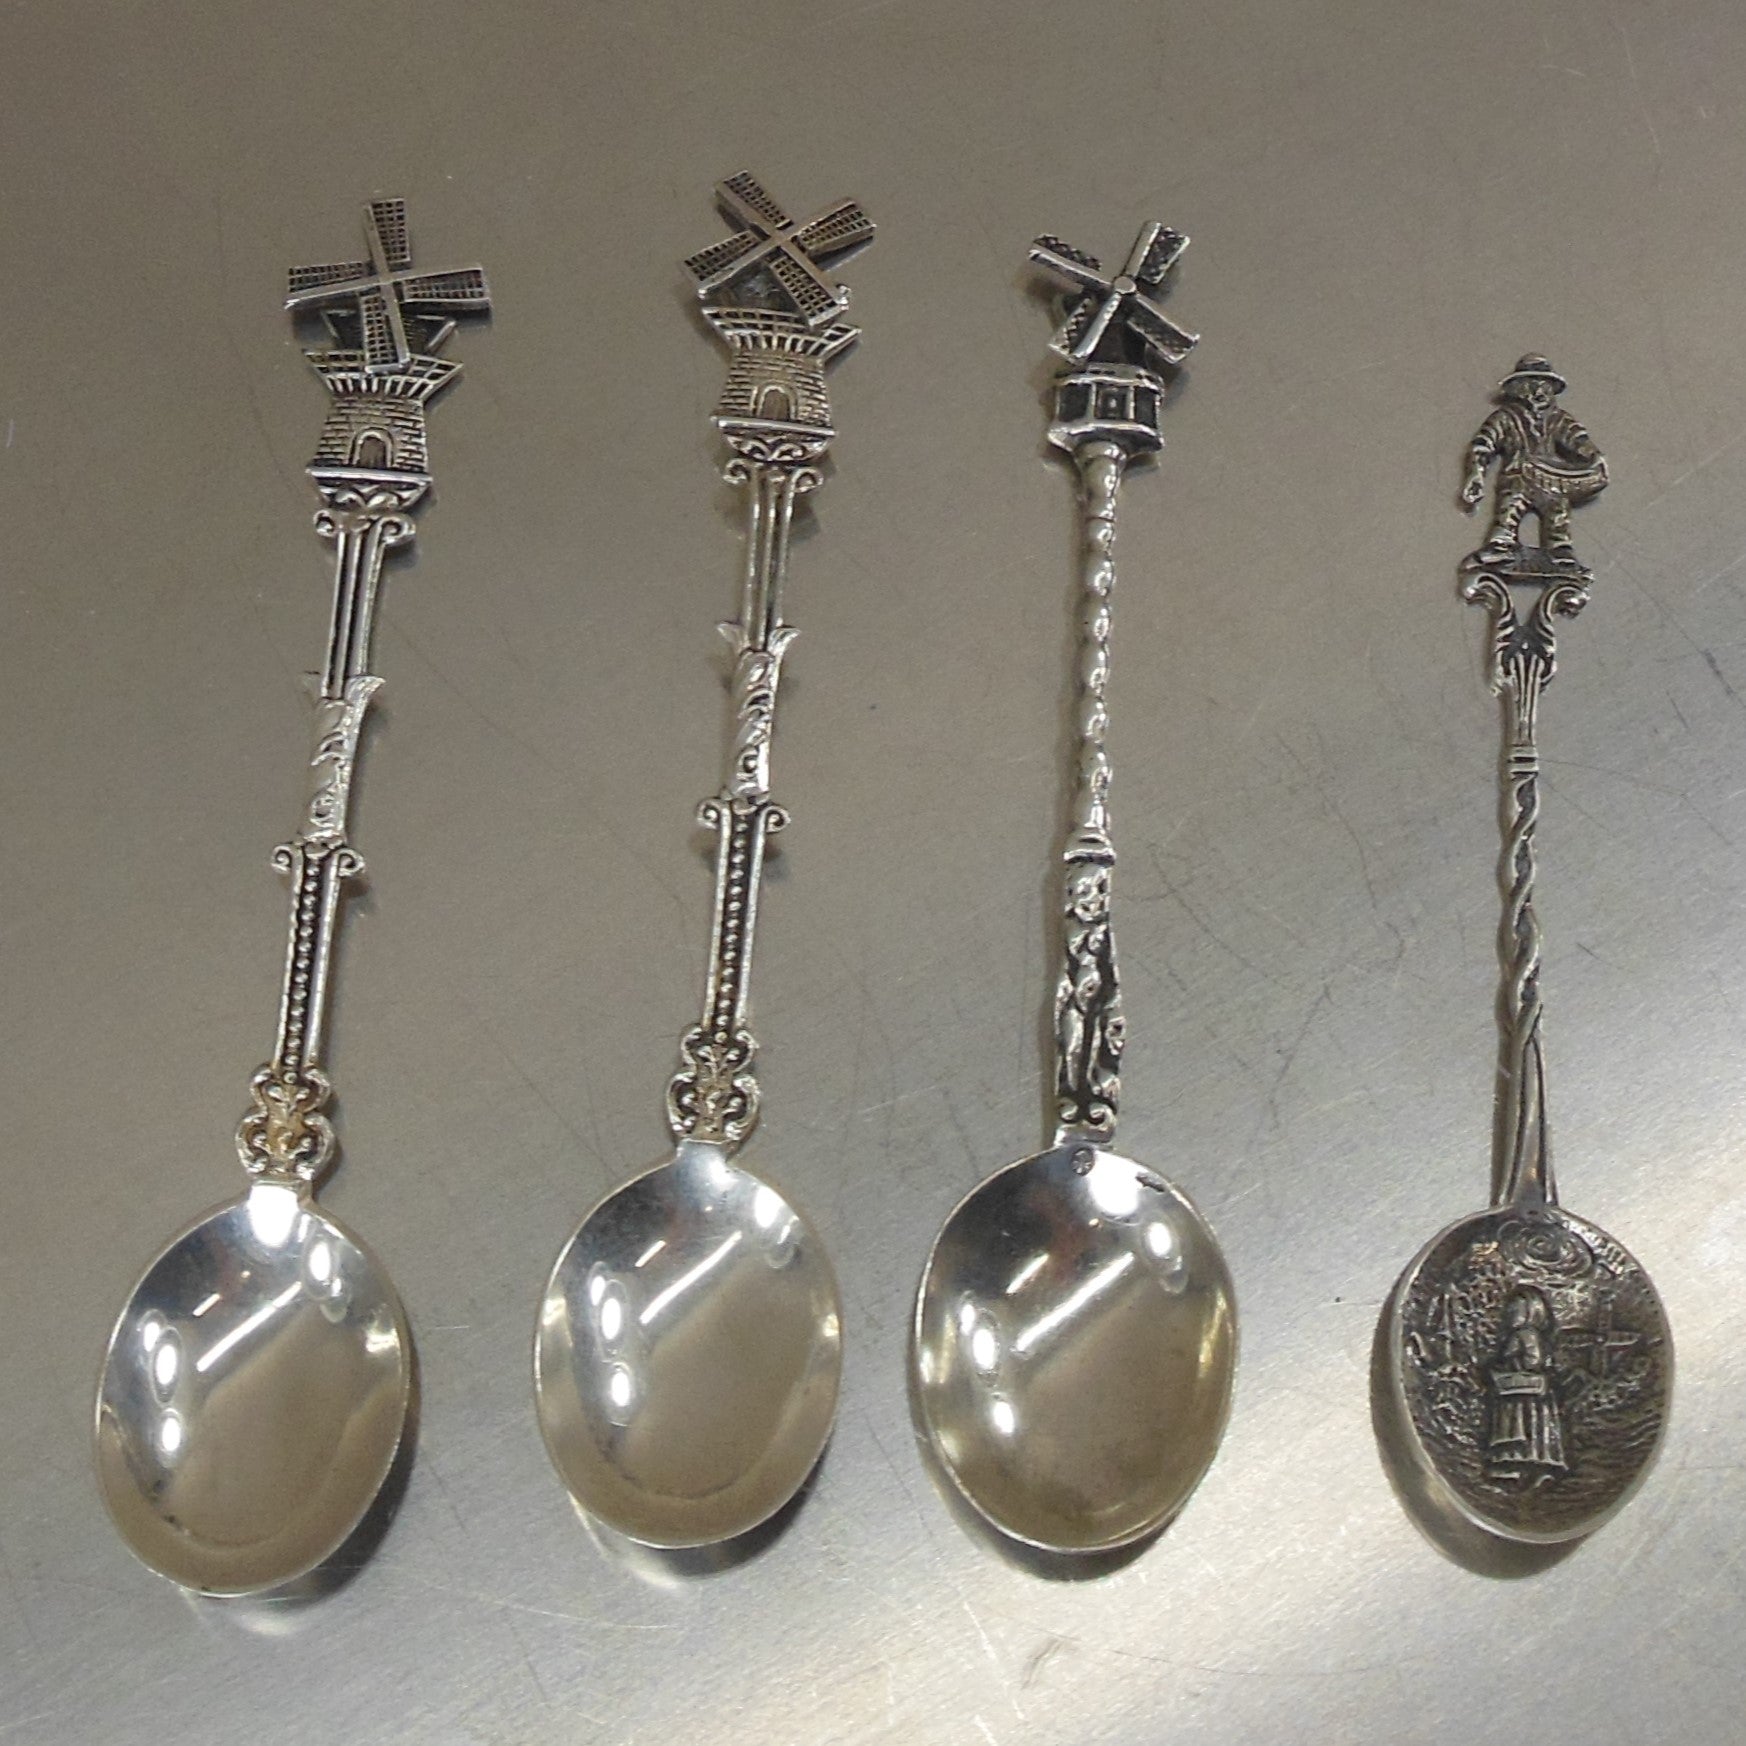 Estate 4 Lot 835 or 925 Silver Souvenir Spoons Spinning Windmill Figural Vintage